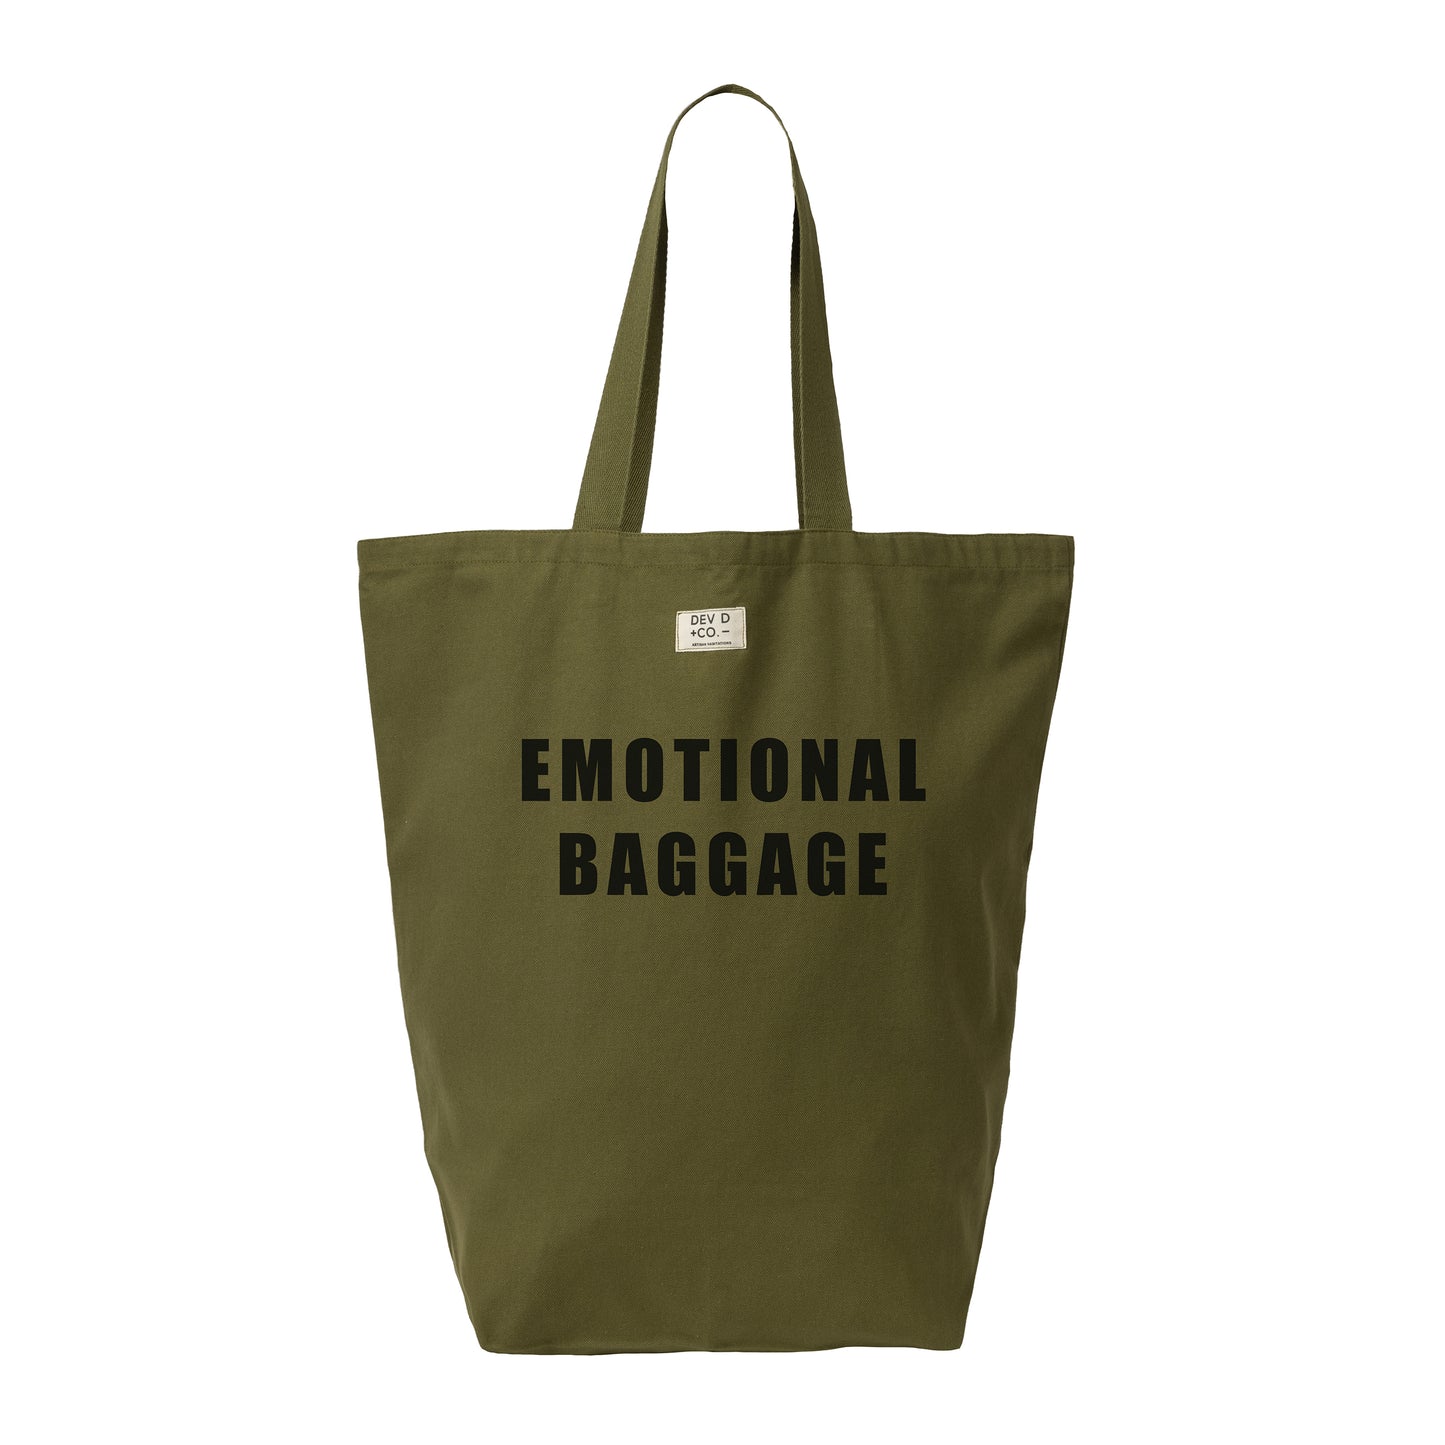 Emotional Baggage - Canvas Tote Bag with Pocket - Large Tote